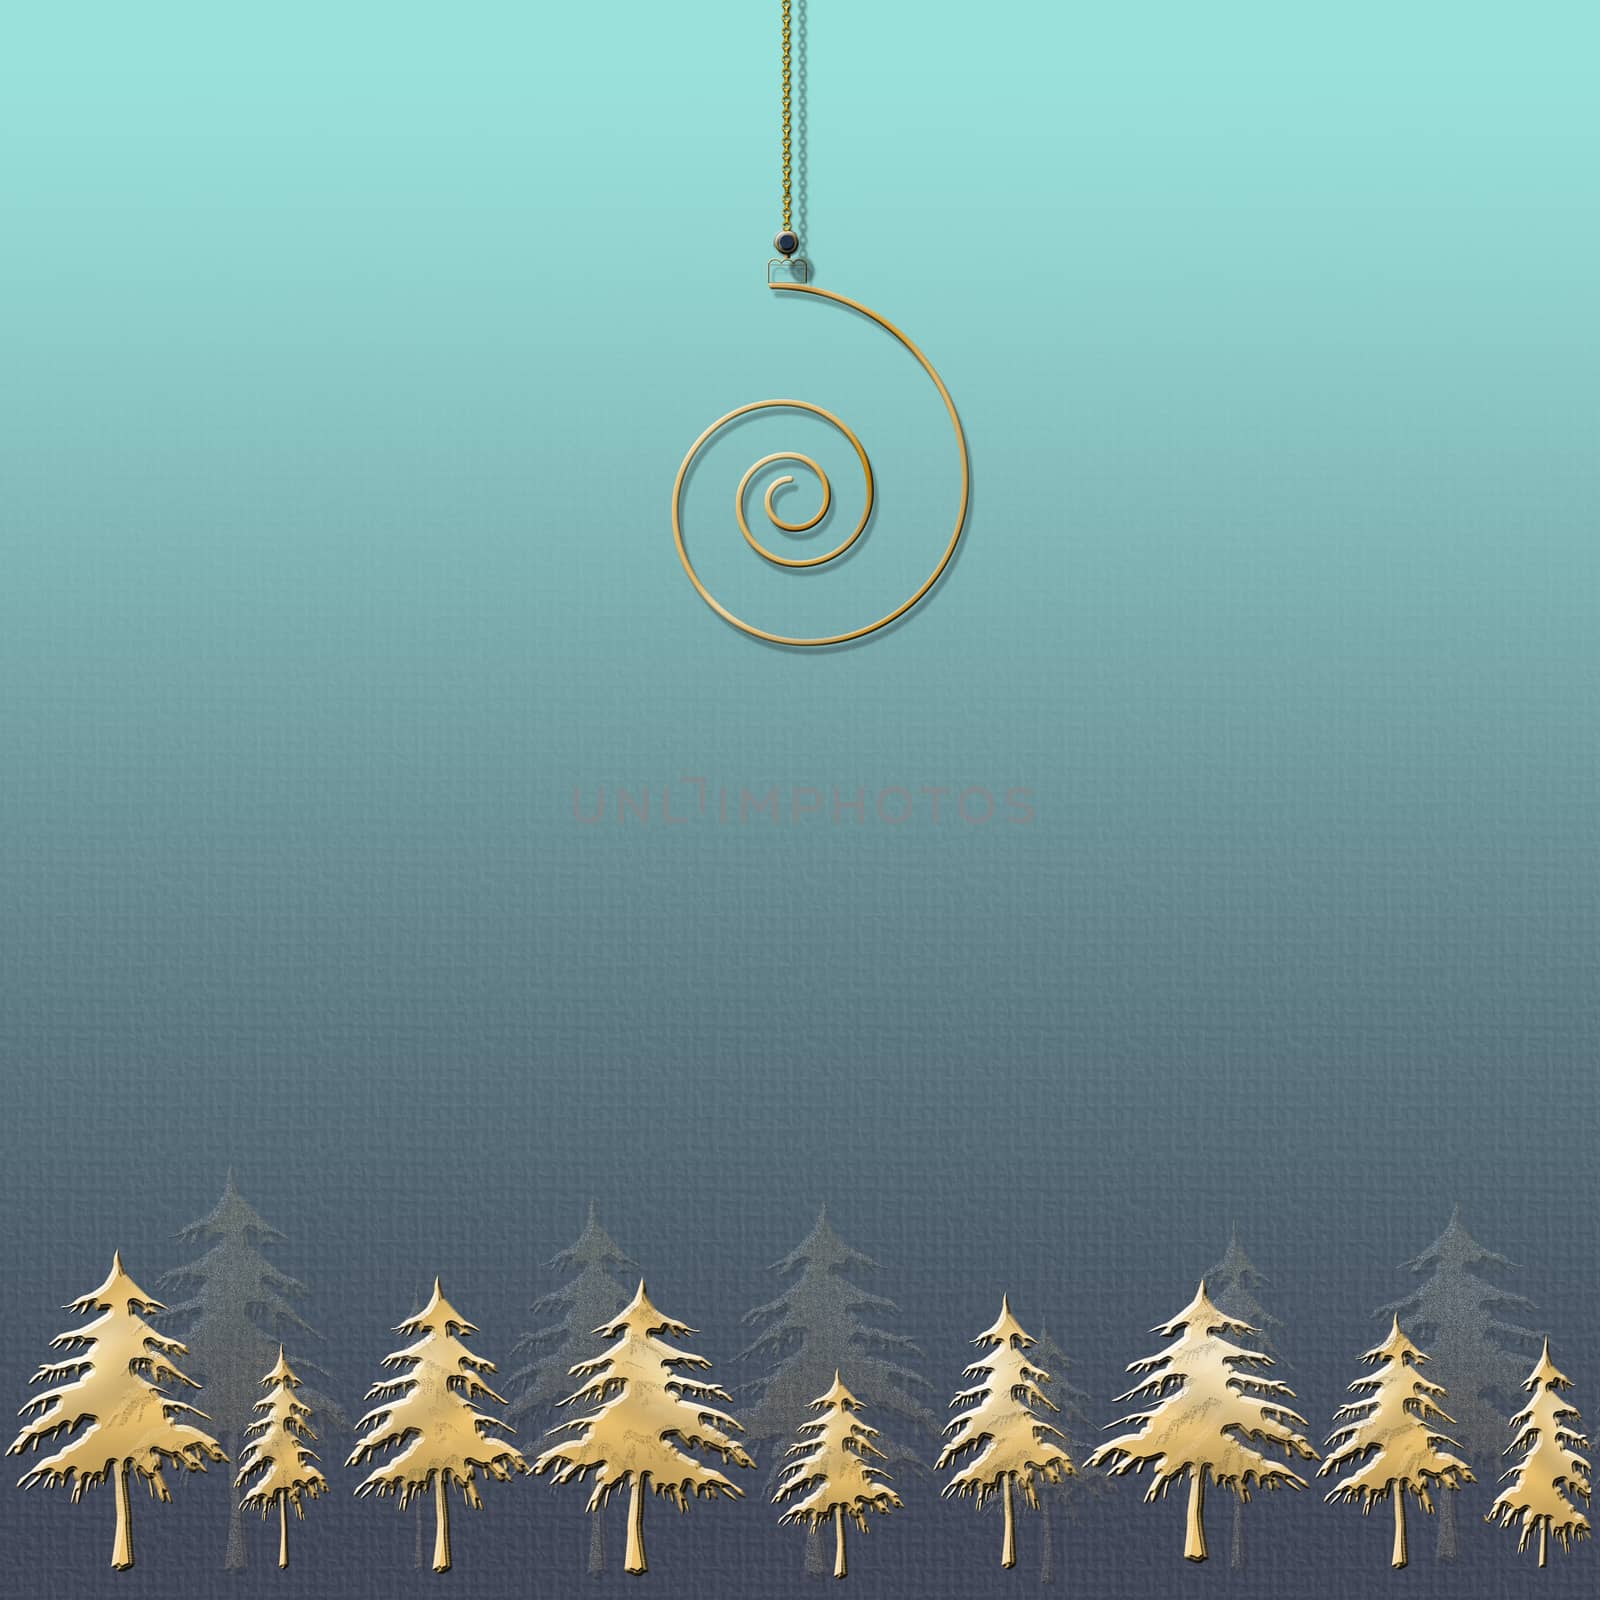 Merry Christmas happy new year gold spiral shape on turquoise background by NelliPolk